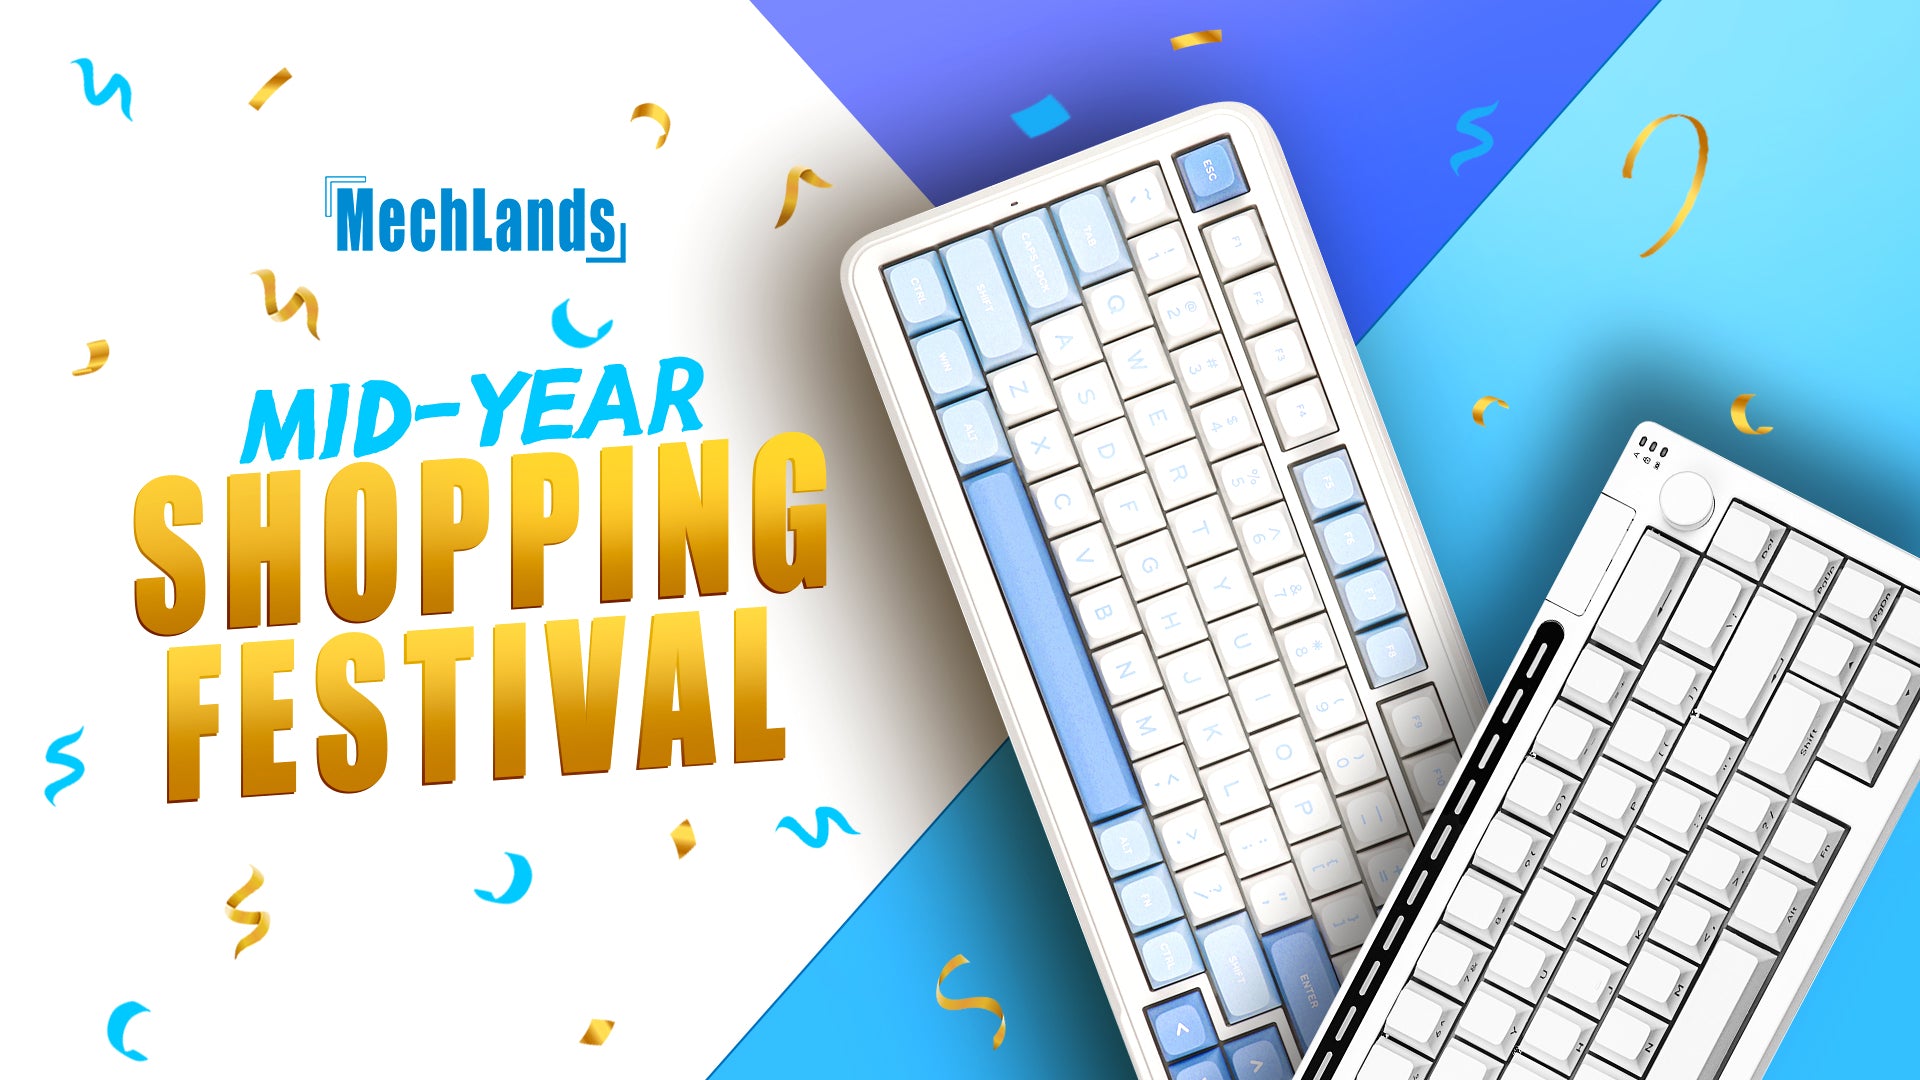 Don't Miss the Mechlands Mid-Year Shopping Festival – Amazing Deals Await!